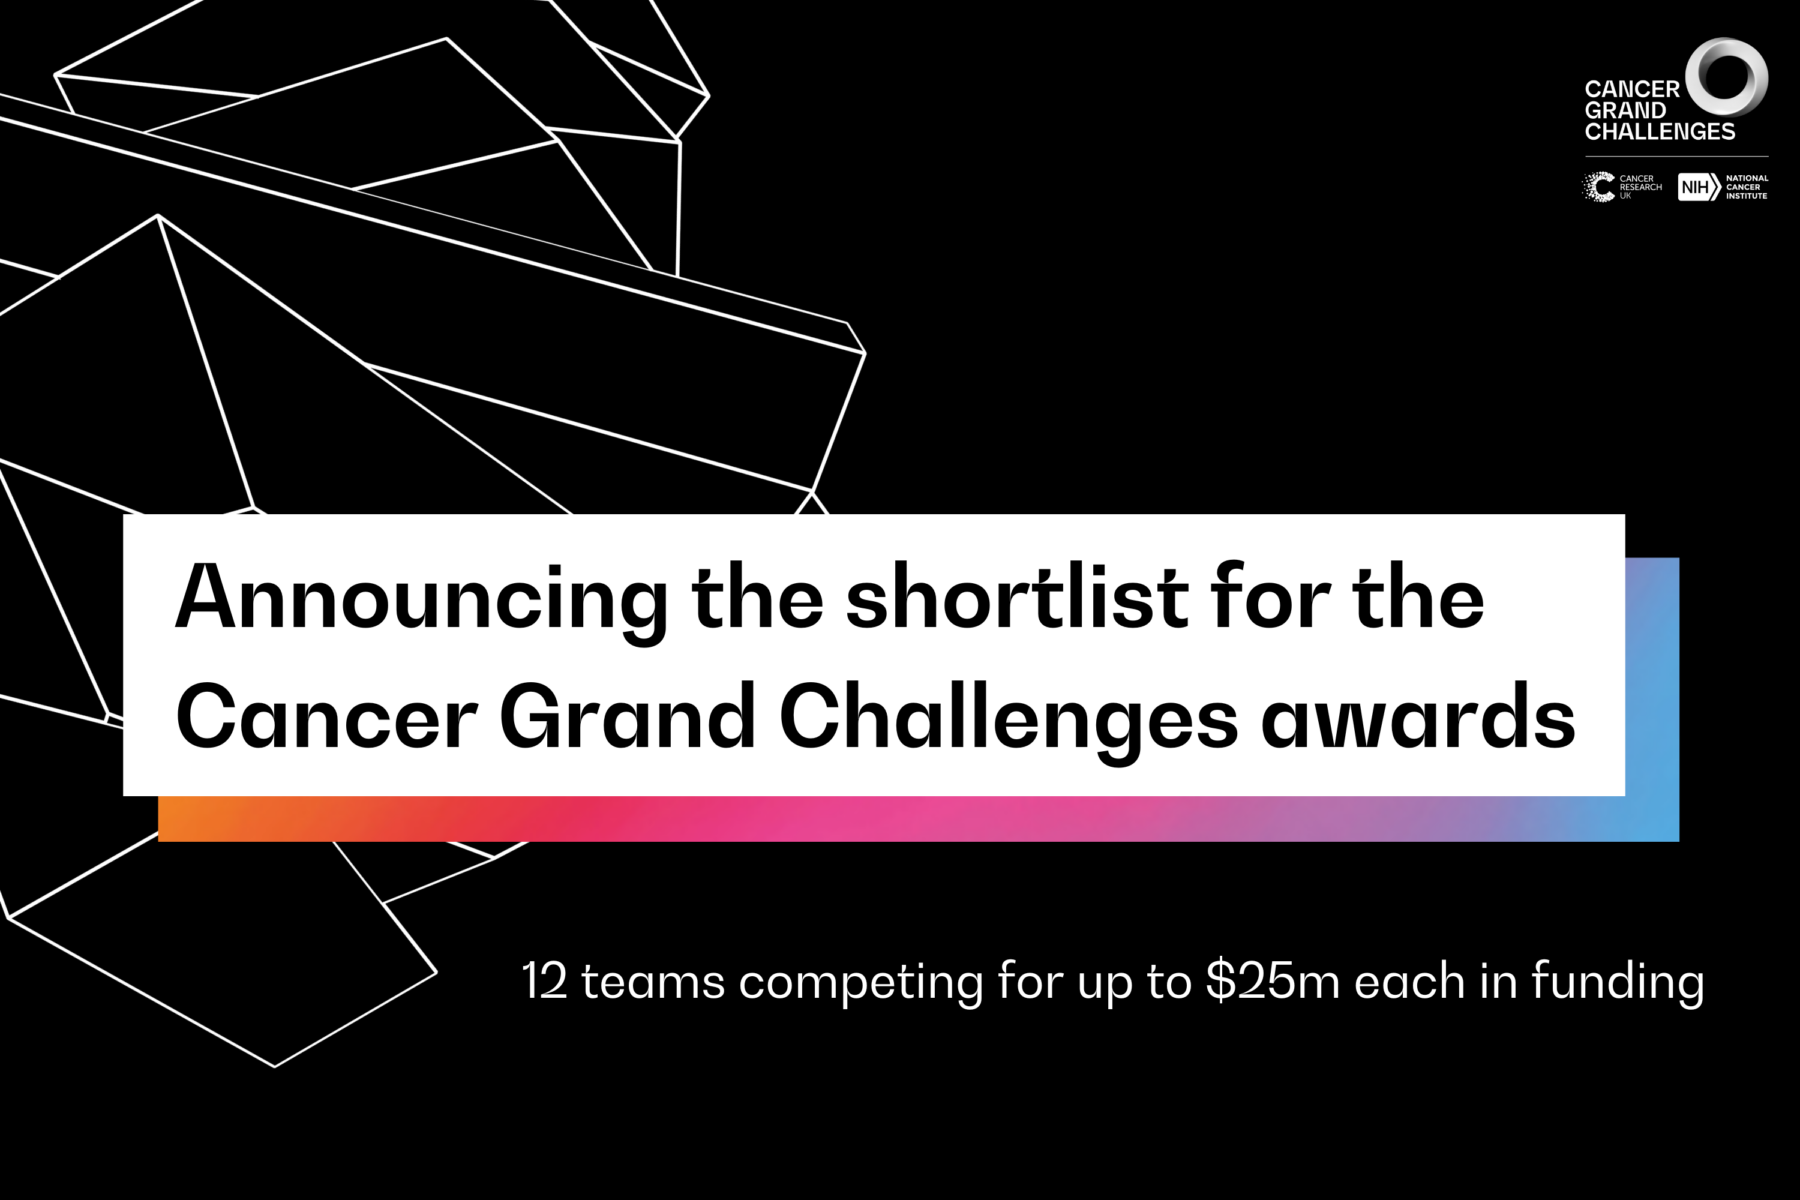 Graphic announcing the Cancer Grand Challenges shortlist